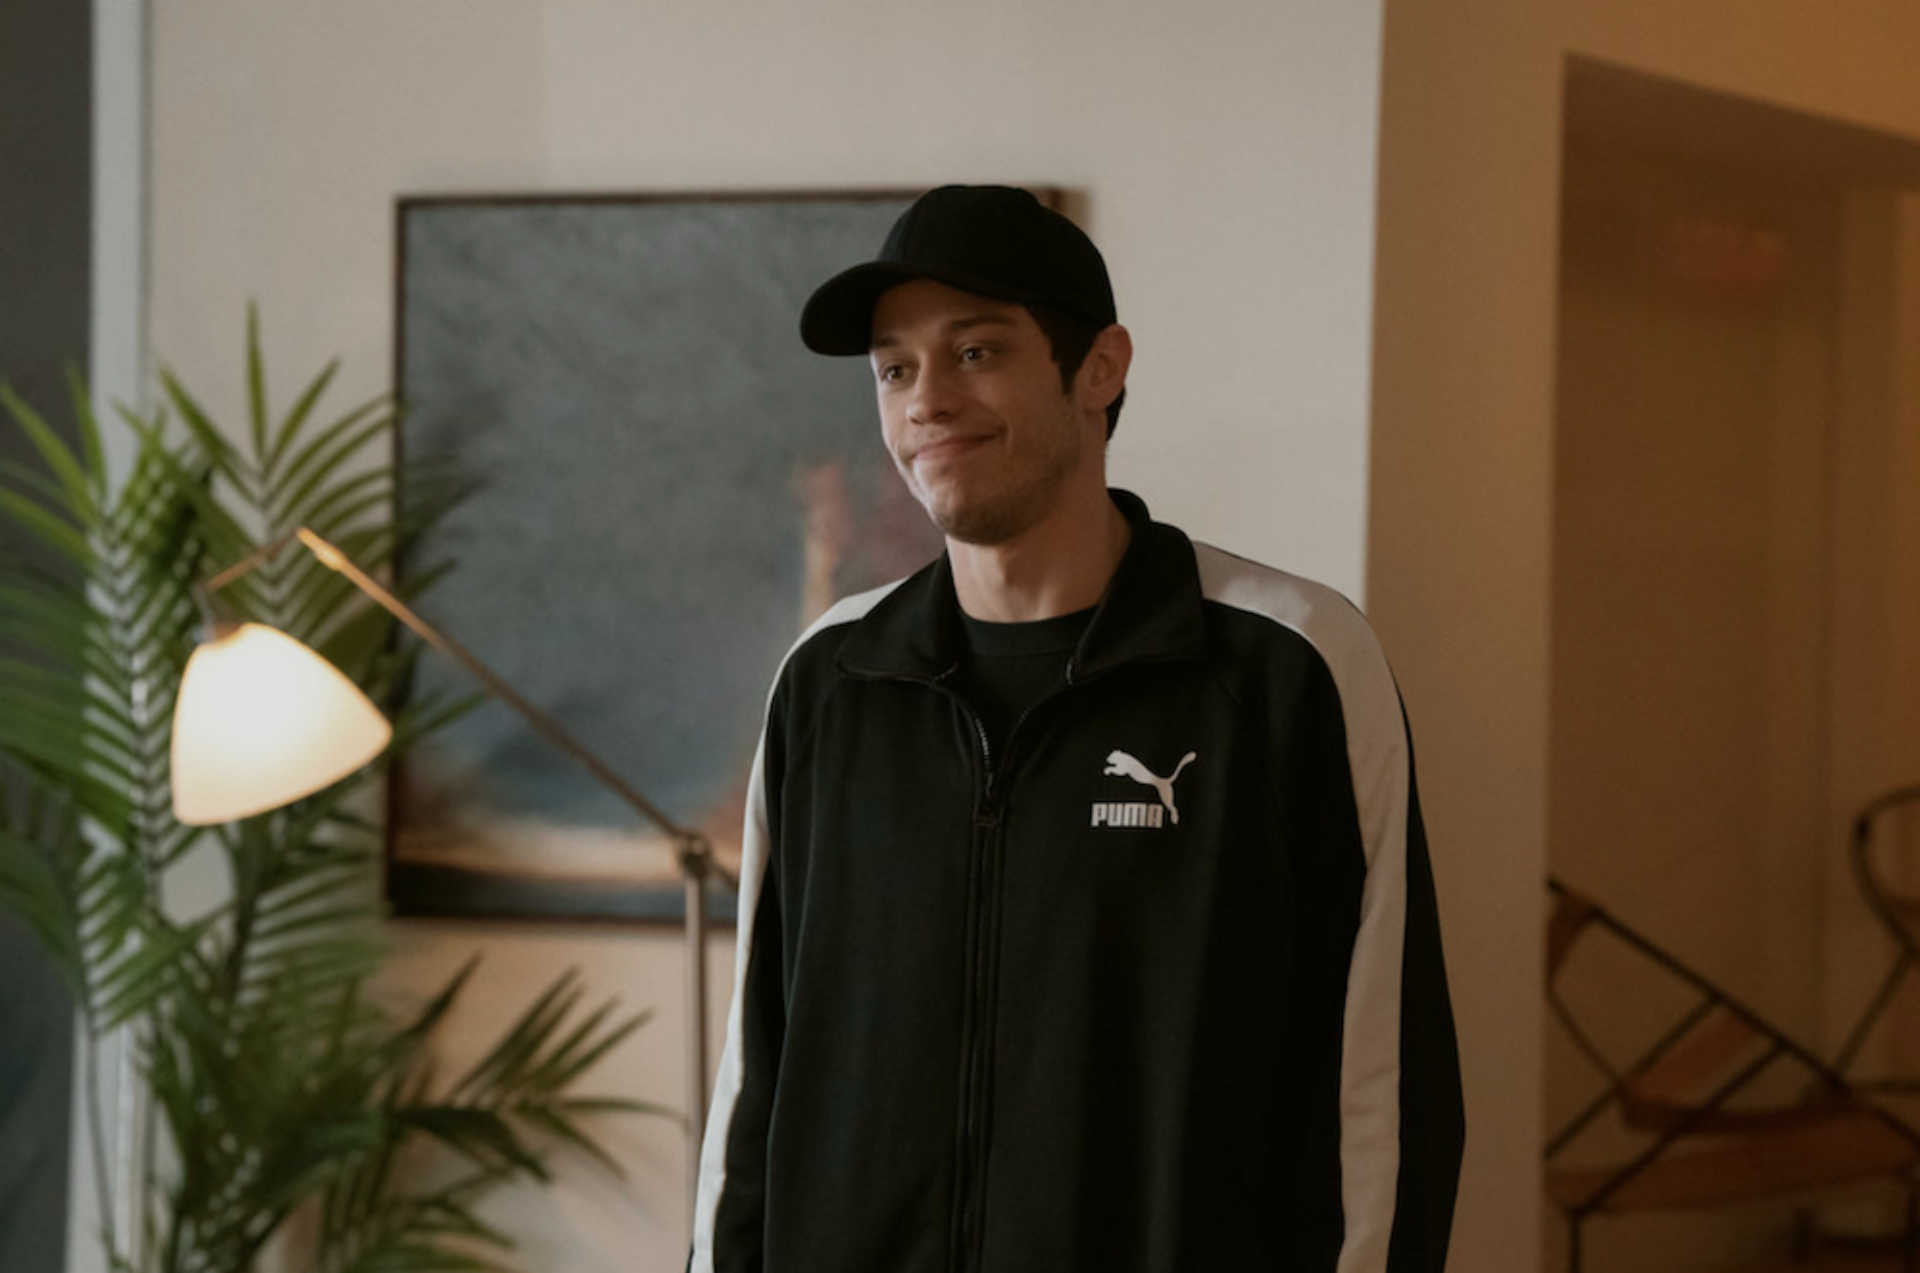 Outer Banks star, Madelyn Cline and Pete Davidson were spotted in the past weakened in Las Vegas for Davidson’s standup comedy show